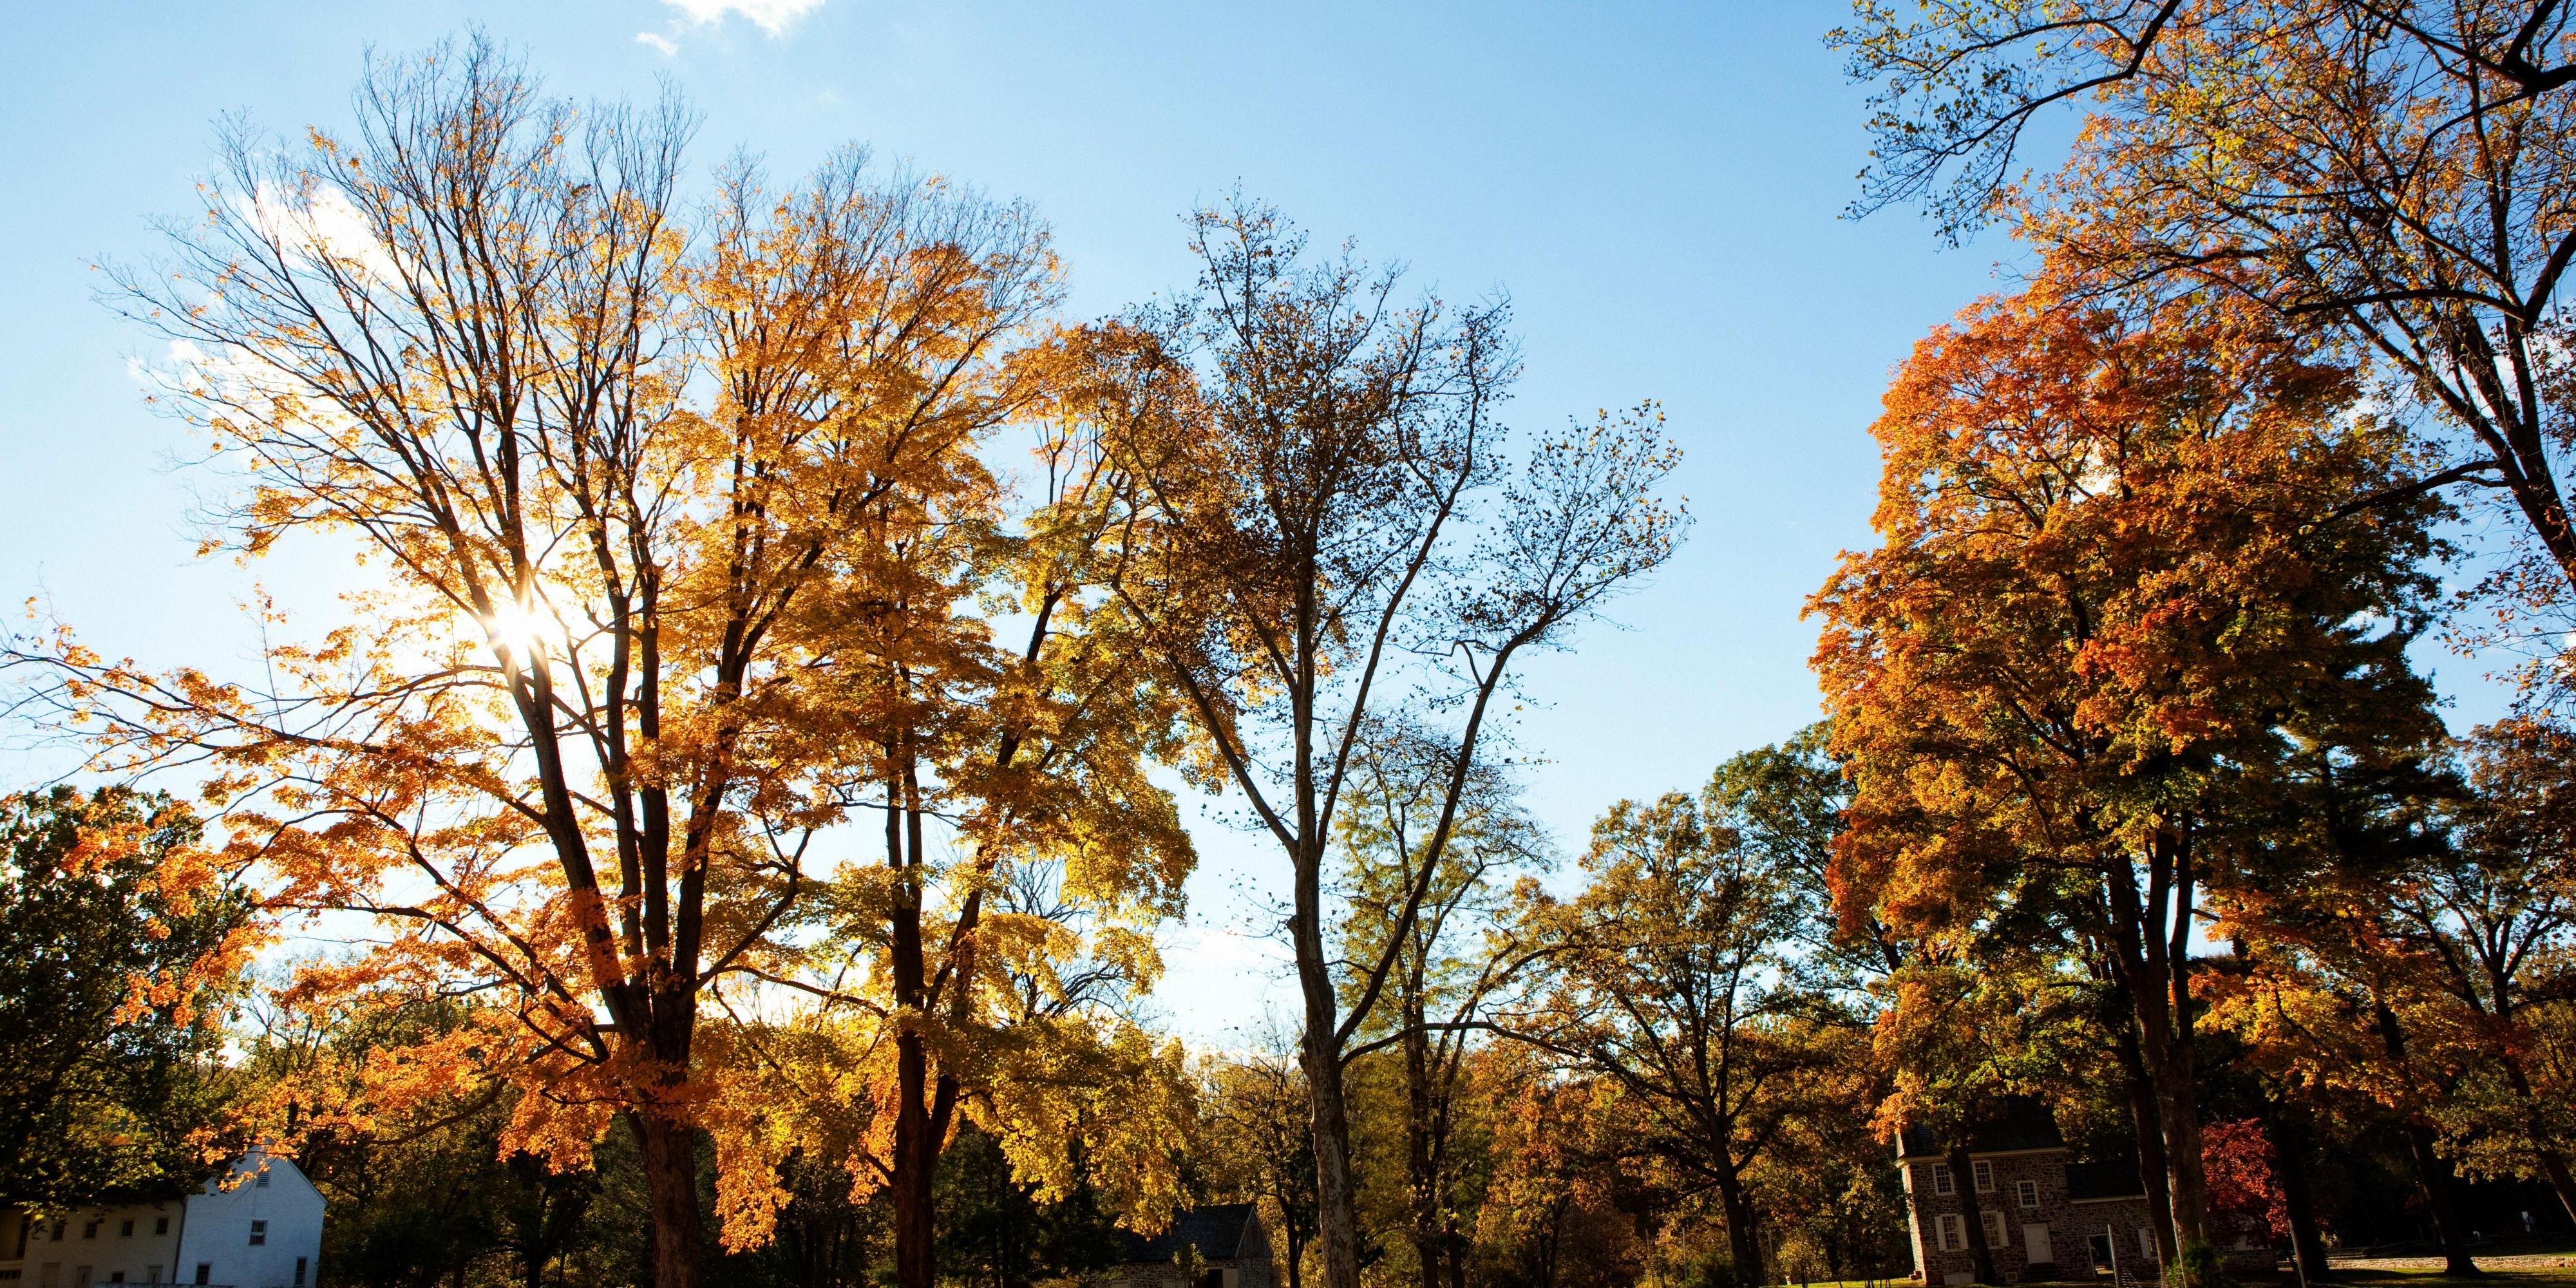 Admire the fall foliage at nearby Valley Forge National Historical Park. With 30 miles of trails, this park is perfect for biking and hiking enthusiasts. Or, take one of the daily trolley tours throughout the park to historic sites like Muhlenberg's Brigade and Washington's Headquarters.